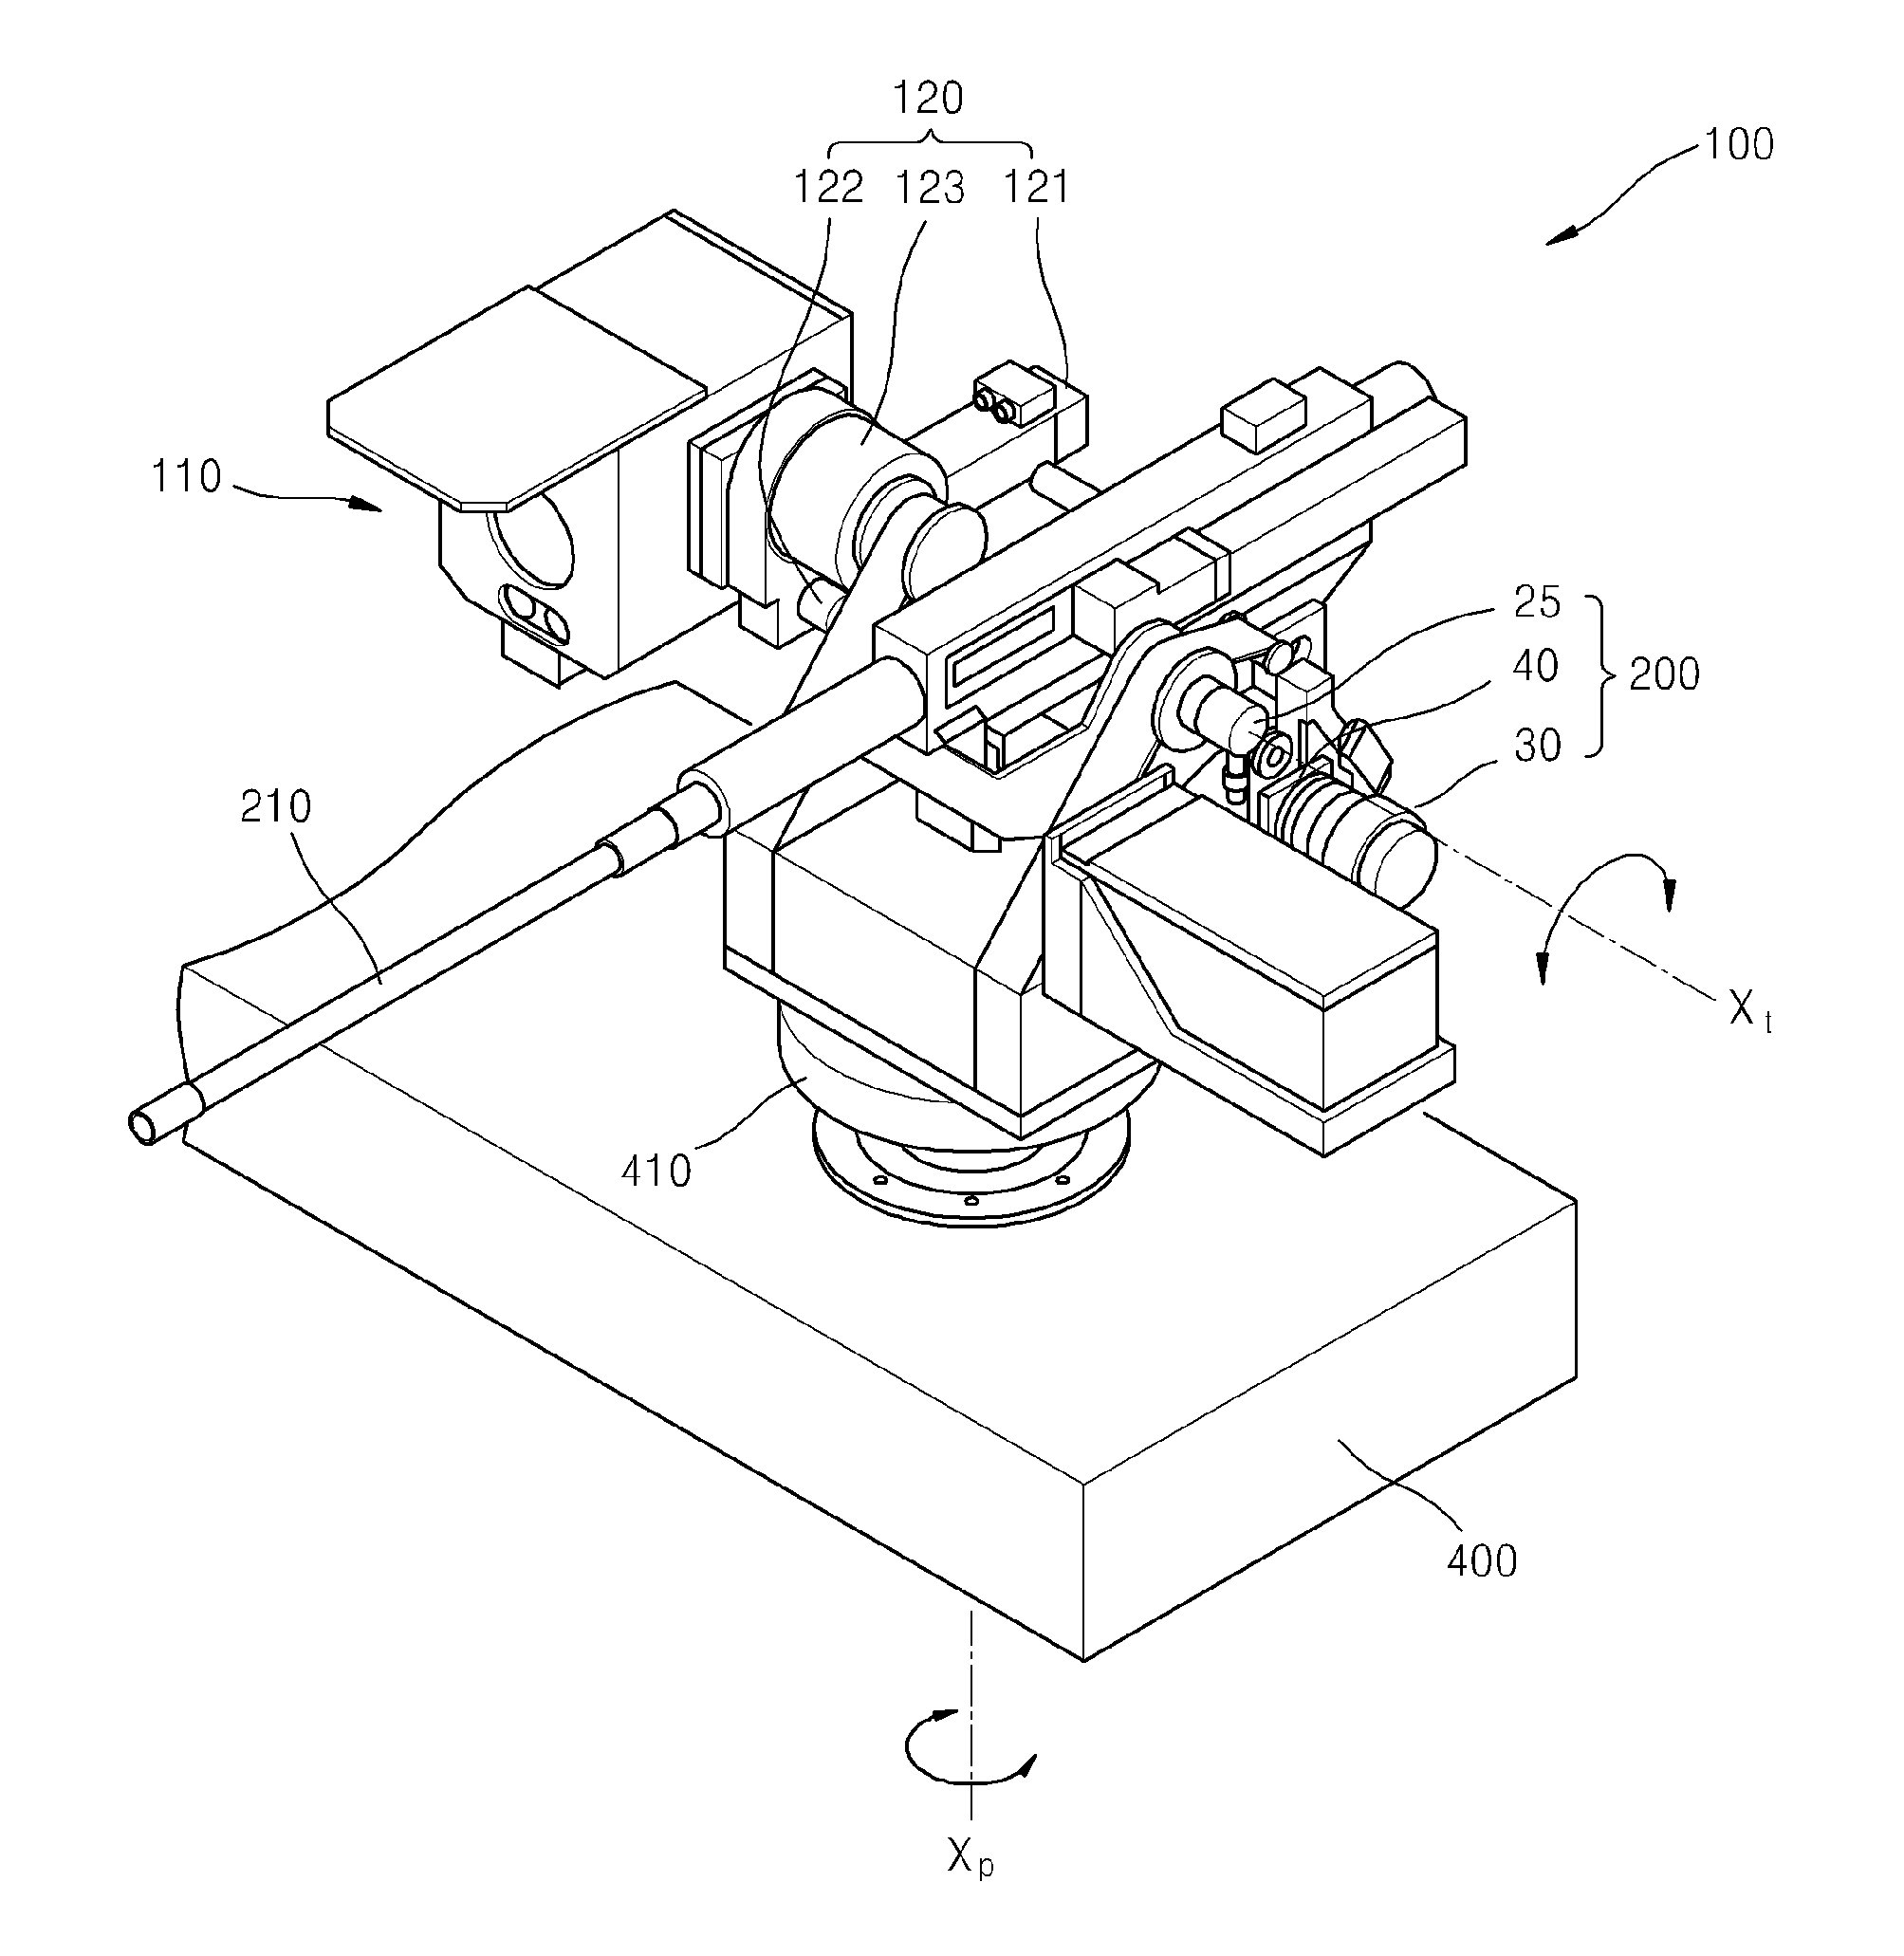 Control system for rotating shaft